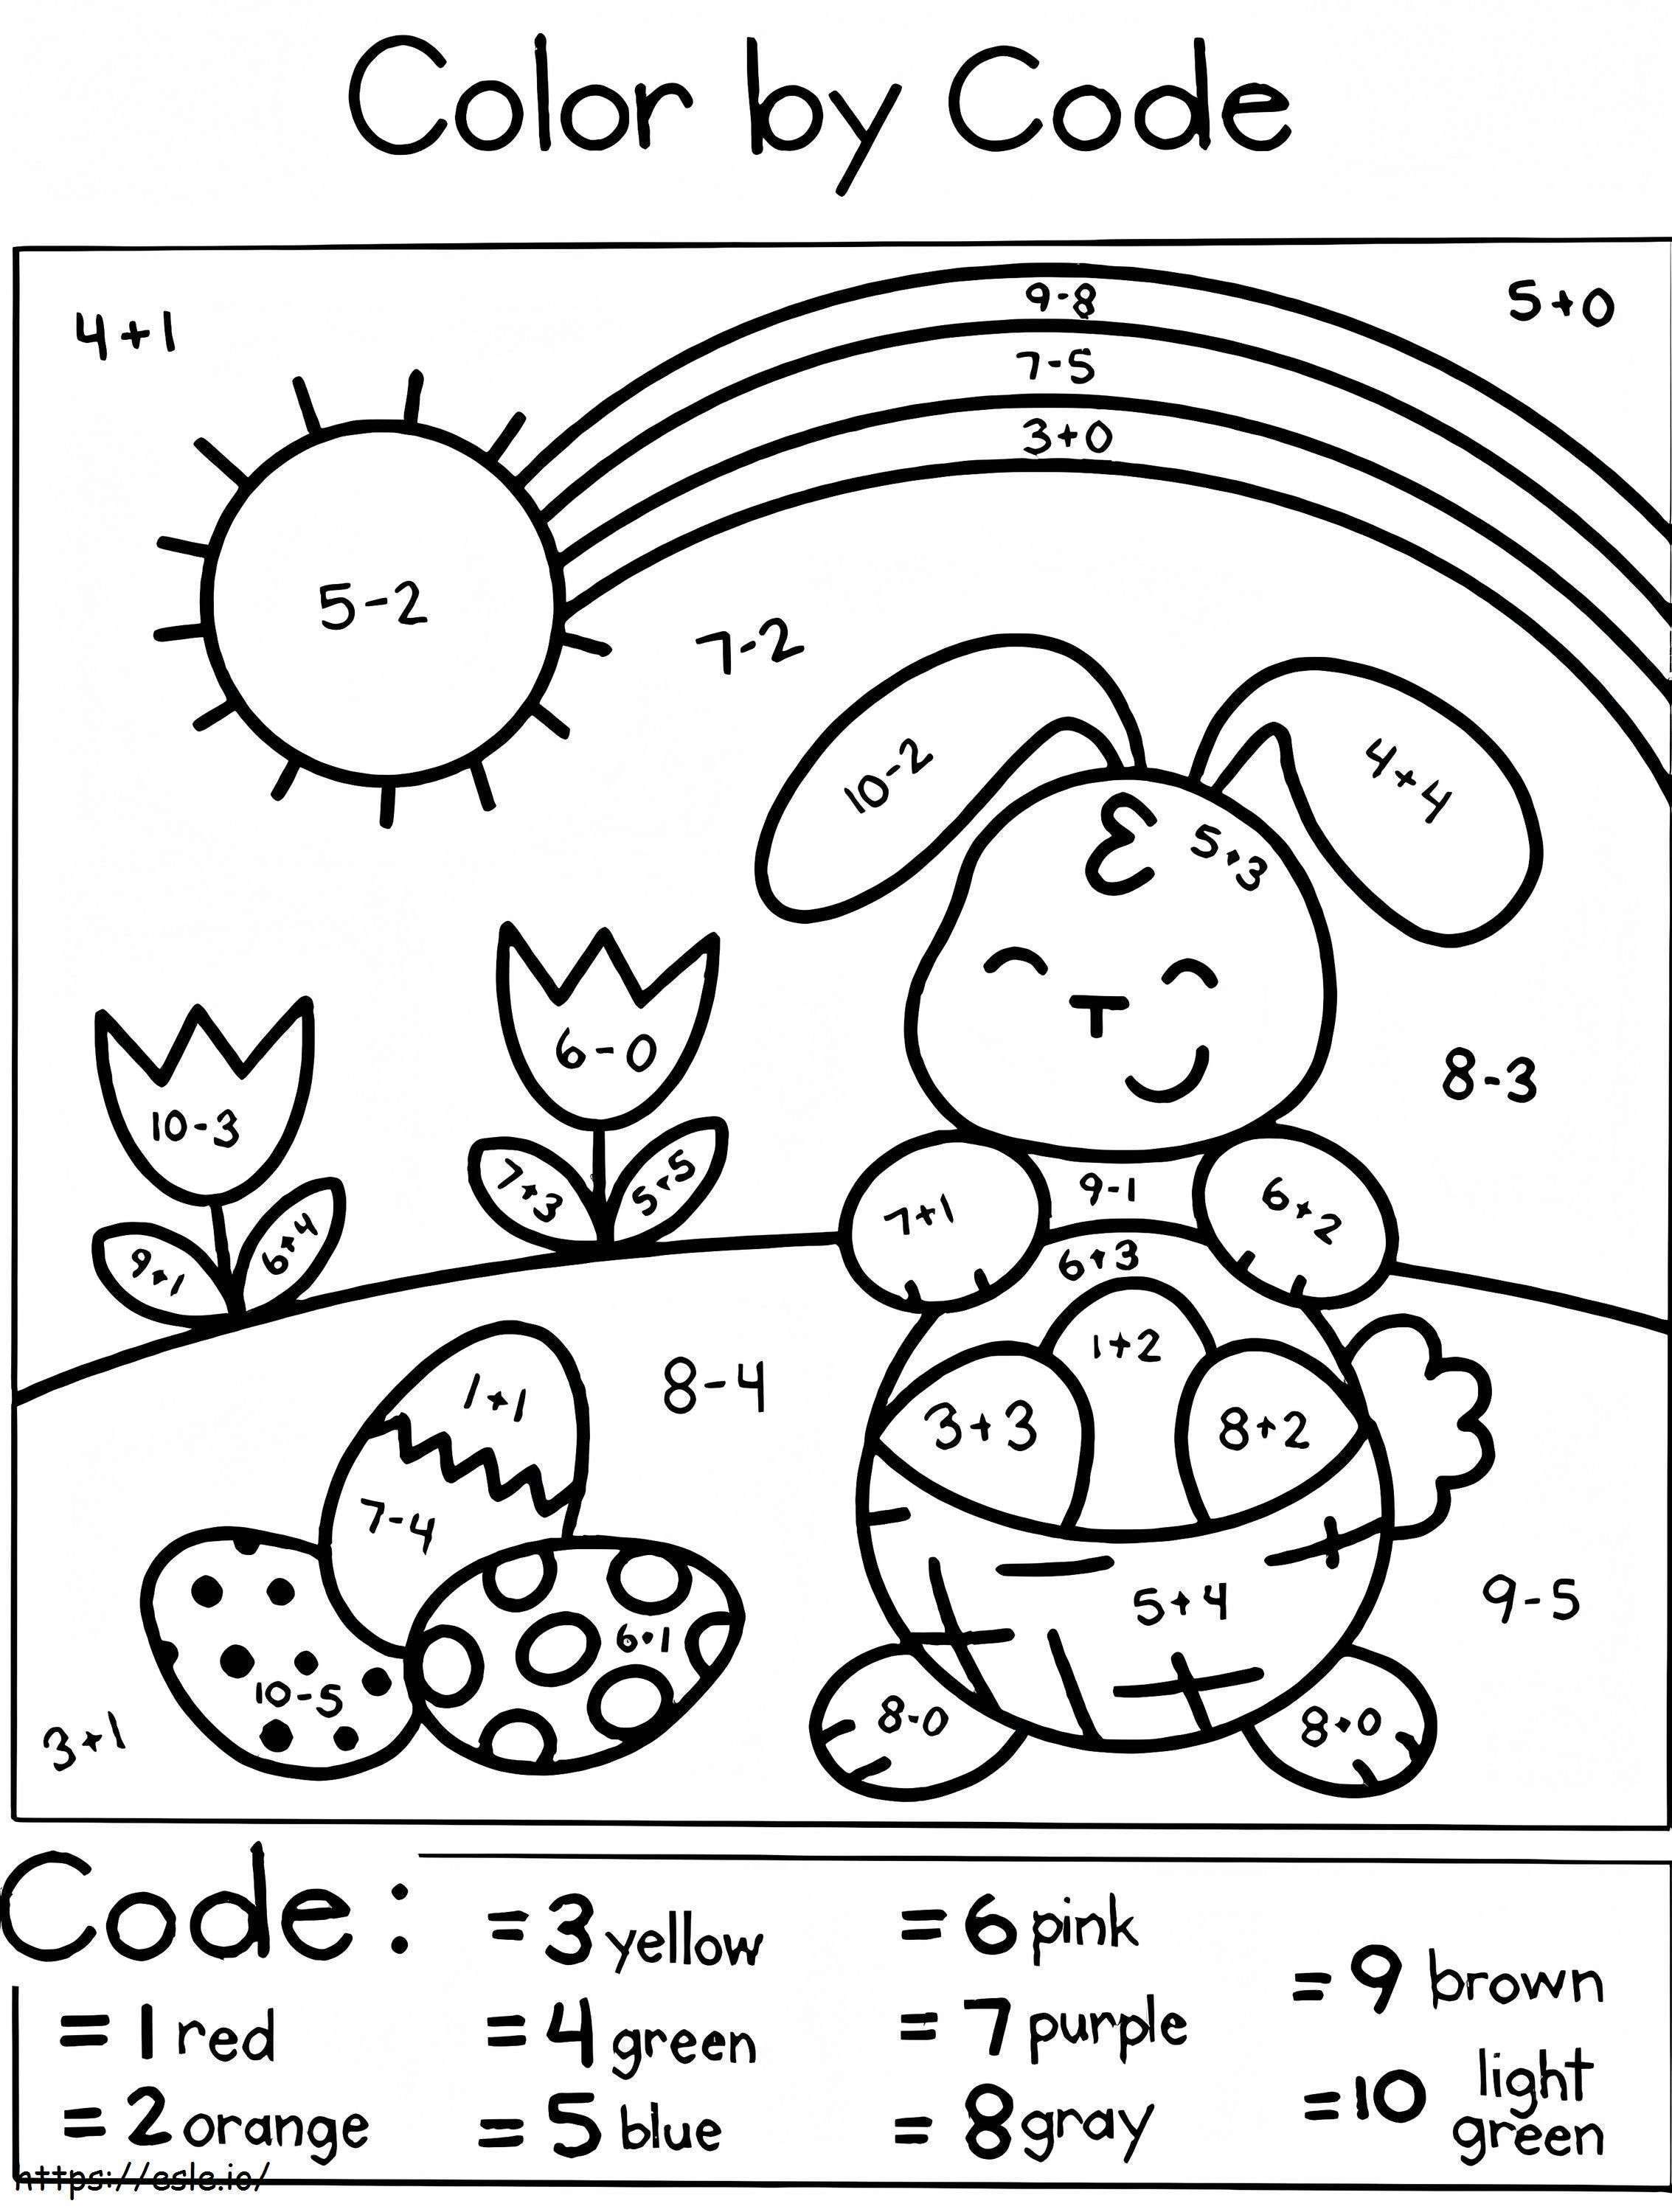 Lovely Easter Bunny Color By Number coloring page